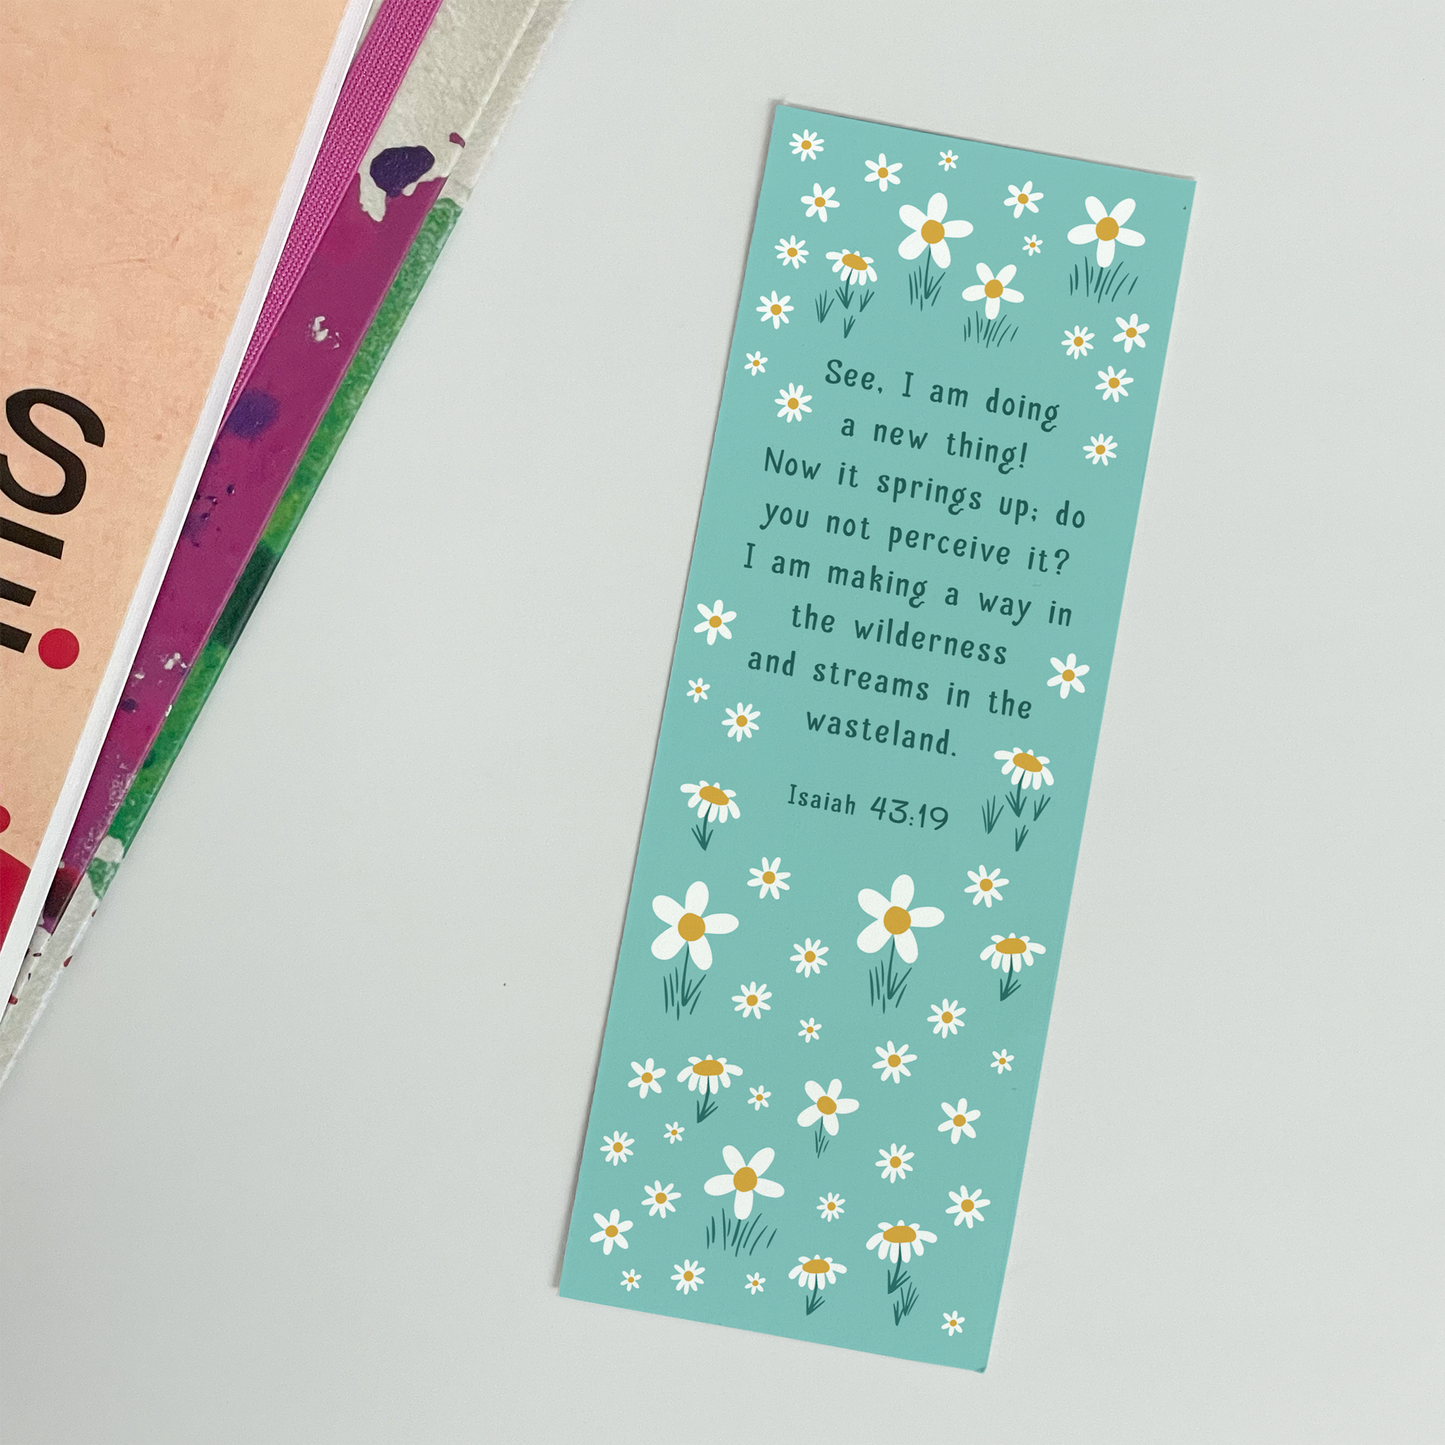 CHRISTIAN BOOKMARK GIFT - Isaiah 43:19 - THE WEE SPARROW